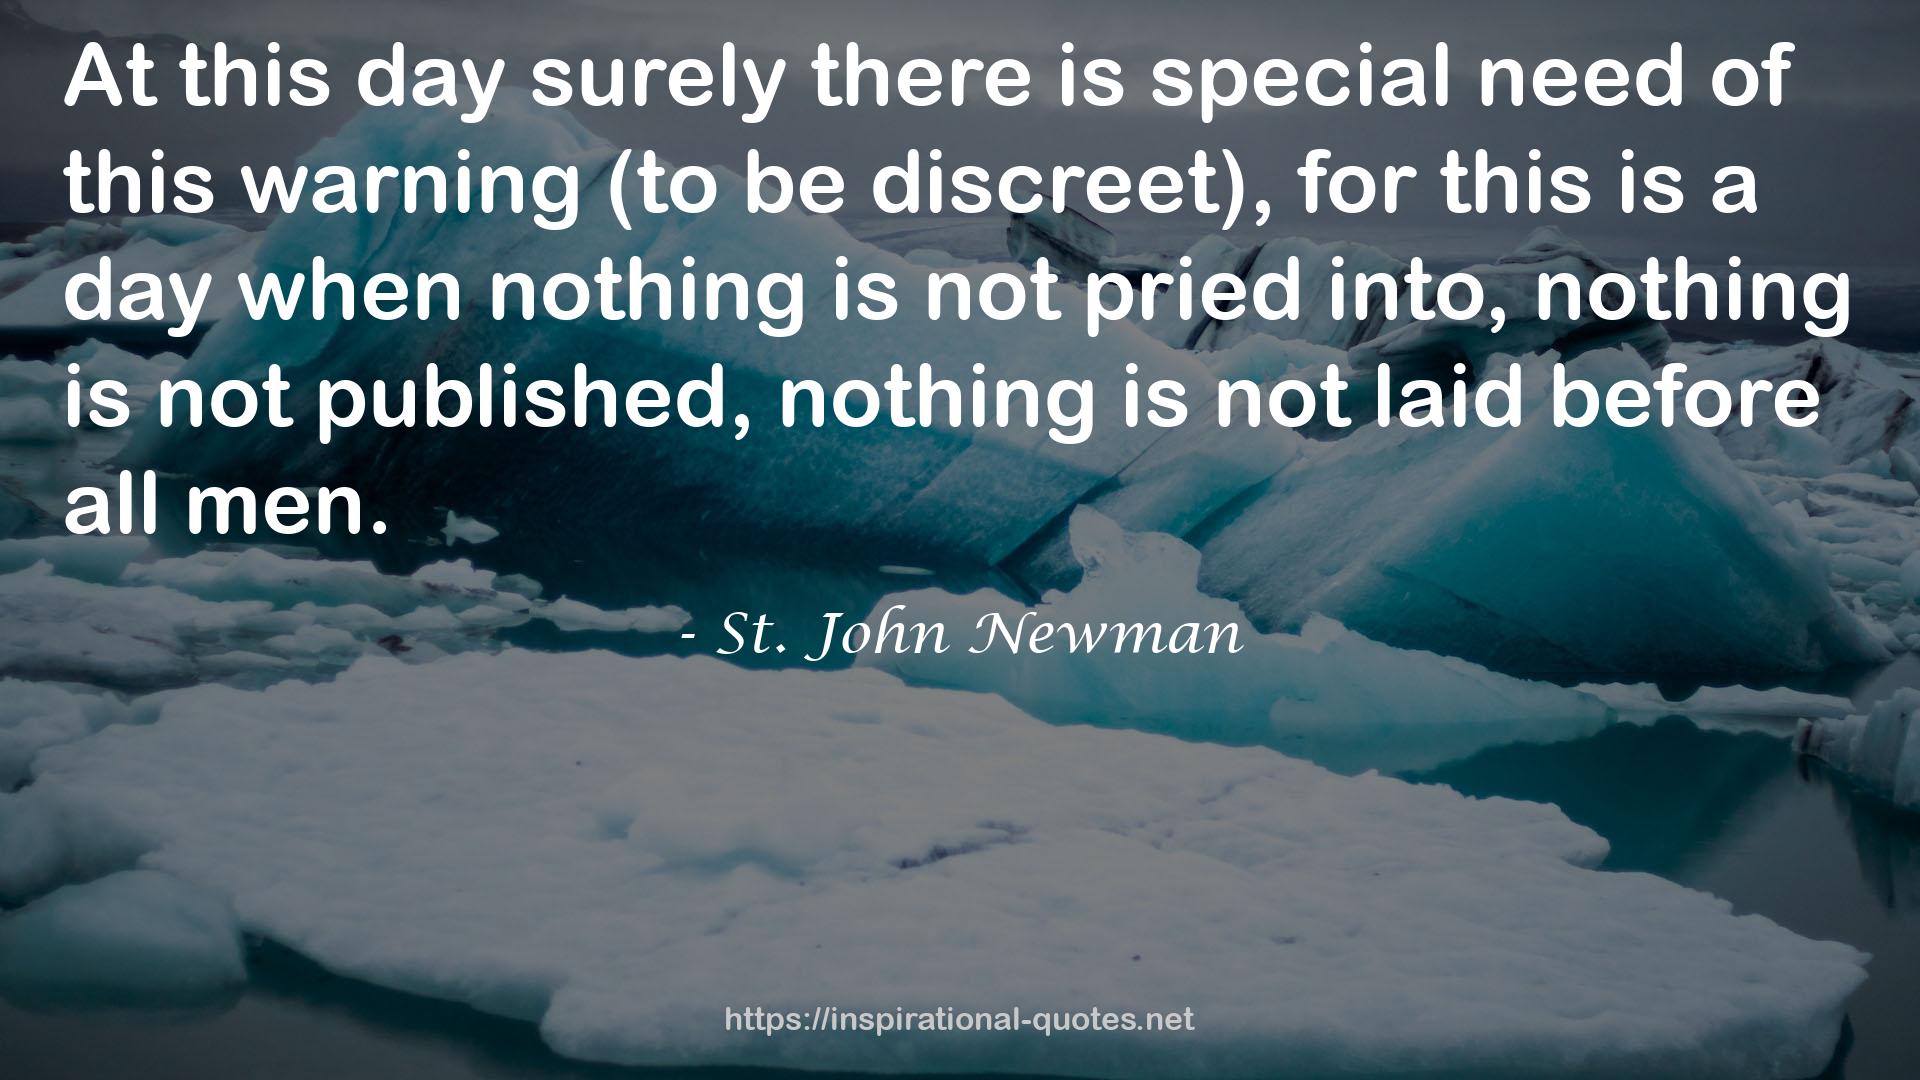 St. John Newman QUOTES